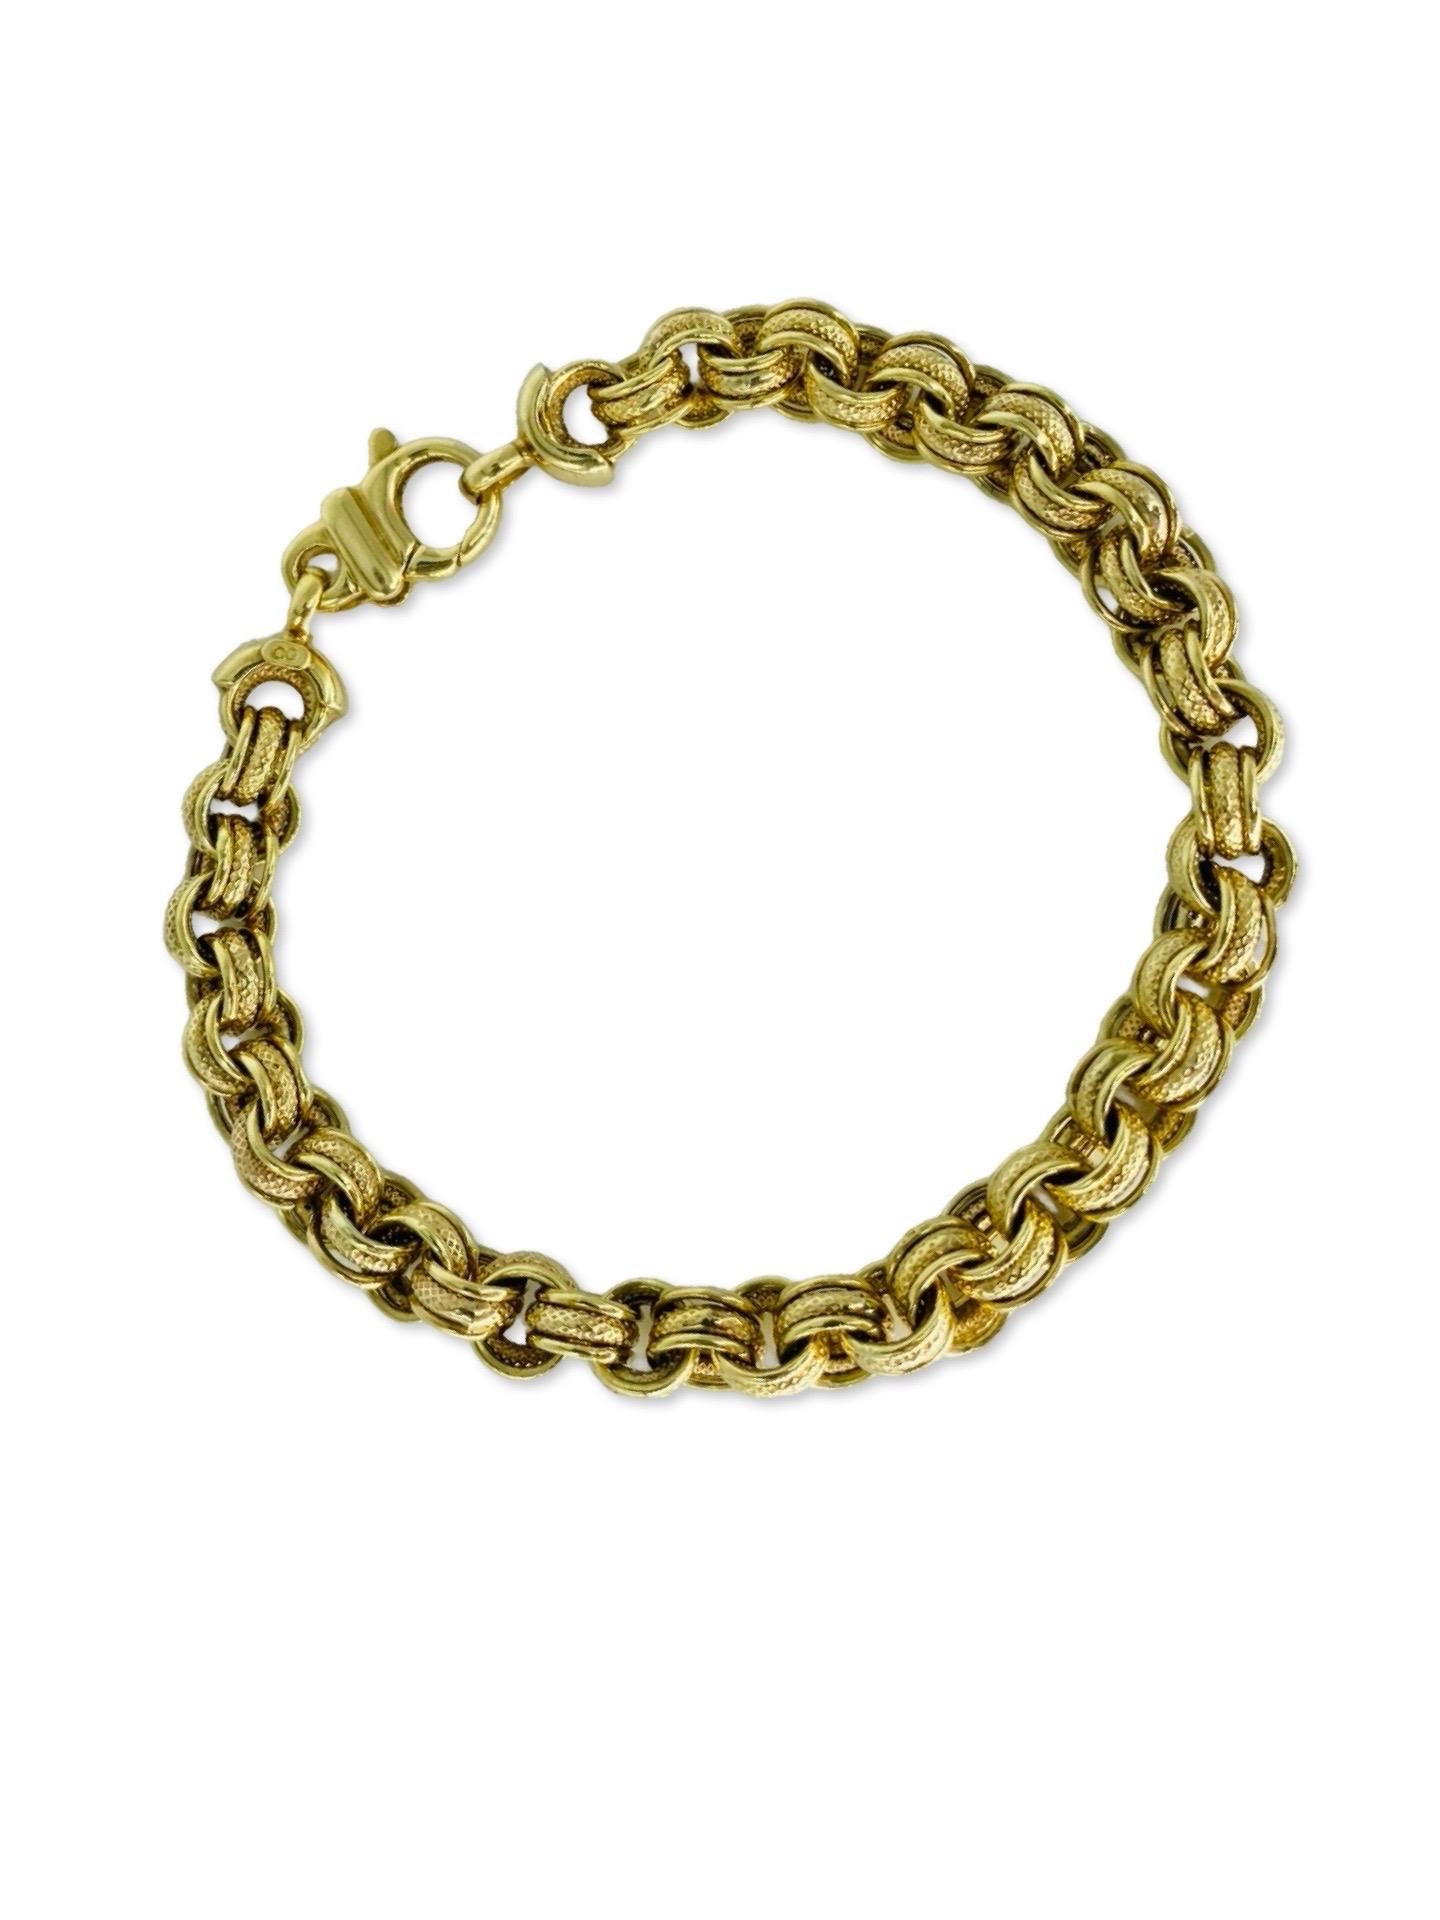 Vintage 6.5mm Fancy Round Link Bracelet. The bracelet features a move around round circle gold hammered designed links. The bracelet is made in 14k gold and is signed GG for makers mark. The bracelet weights 11.6g and is 7 inches long.